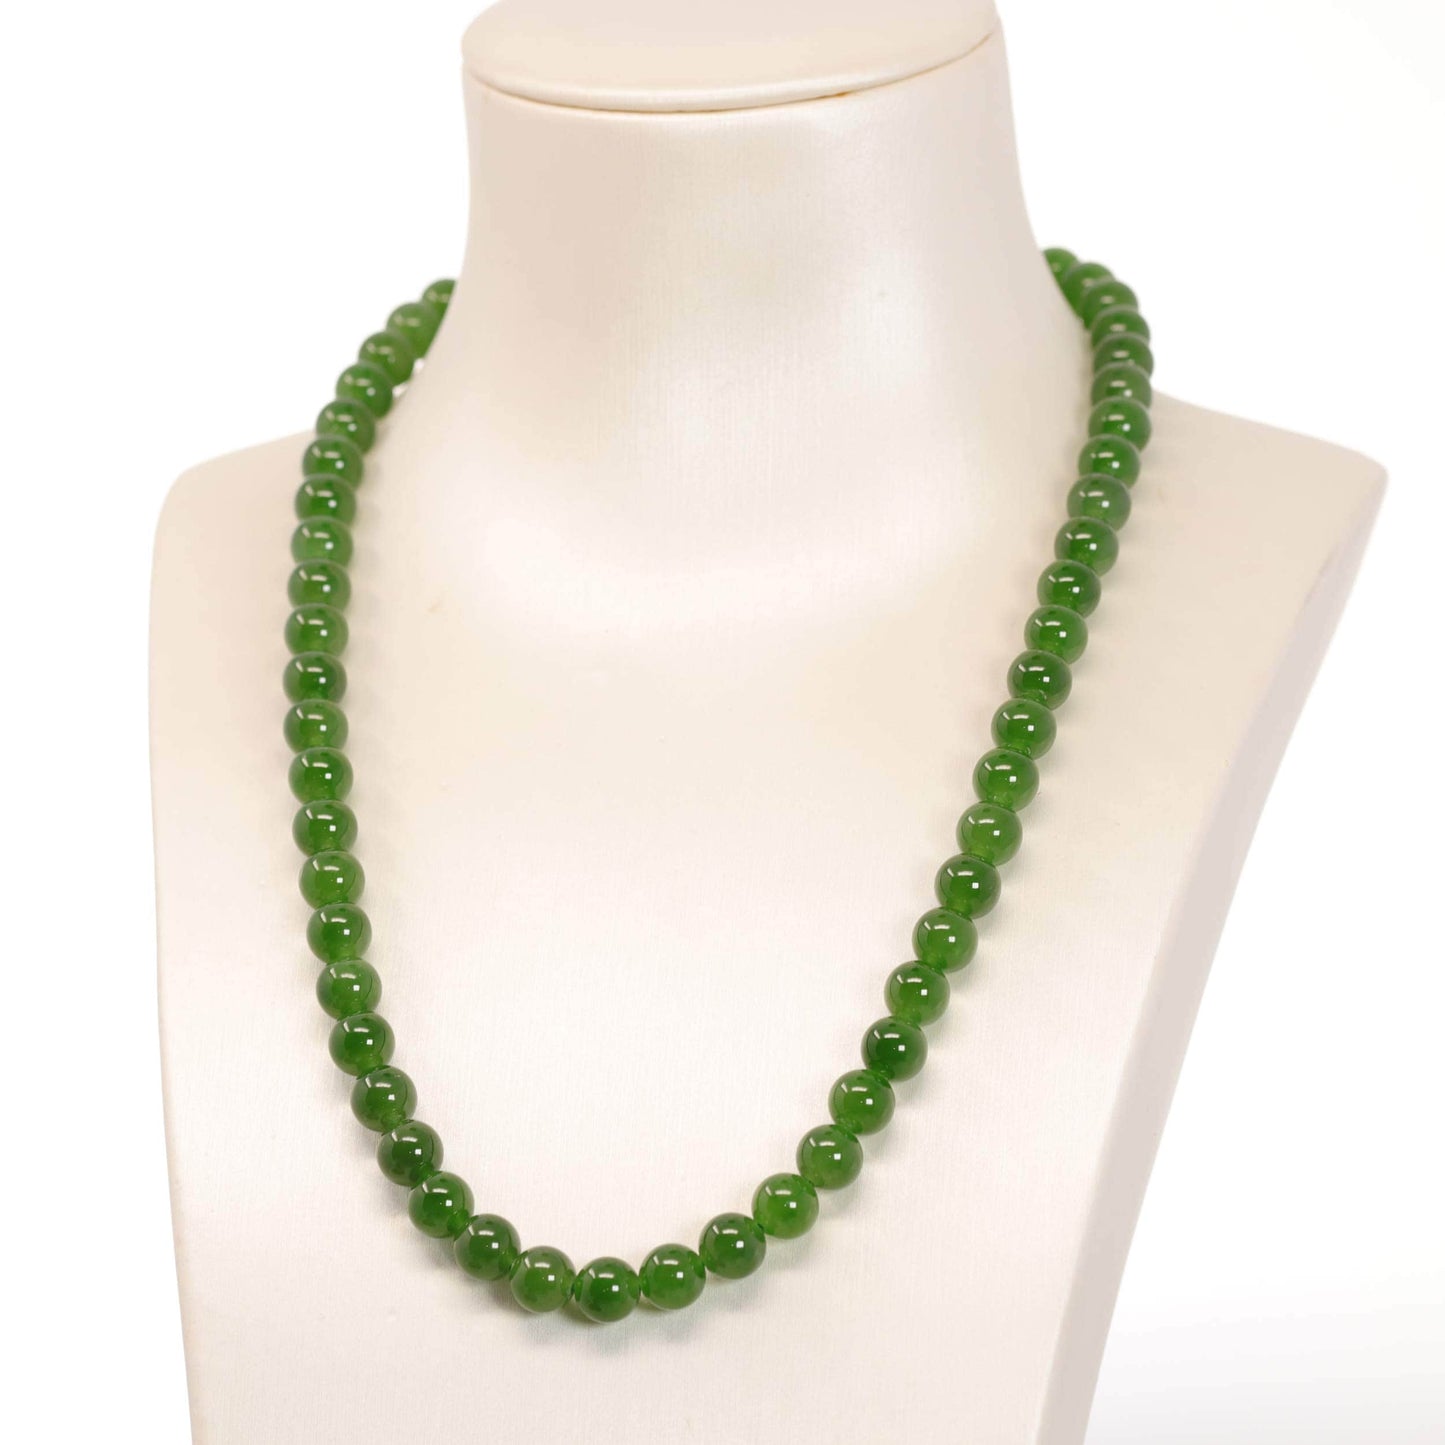 Load image into Gallery viewer, RealJade¨ Genuine High-quality Apple Green Nephrite Jade Round Beads Necklace ( 6mm )
